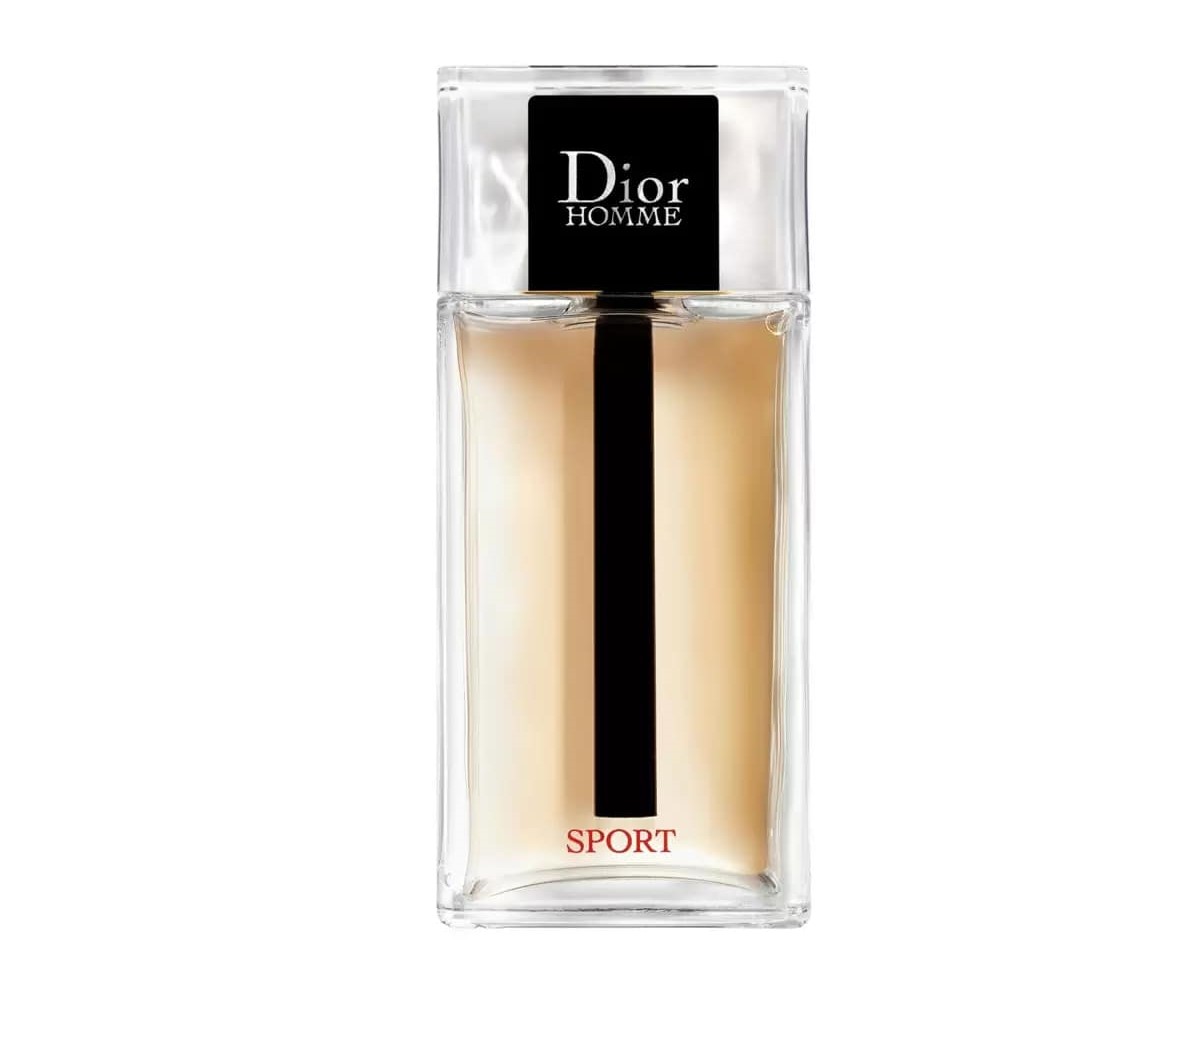 Dior Homme Sport EDT Spray Perfume for Men by Dior